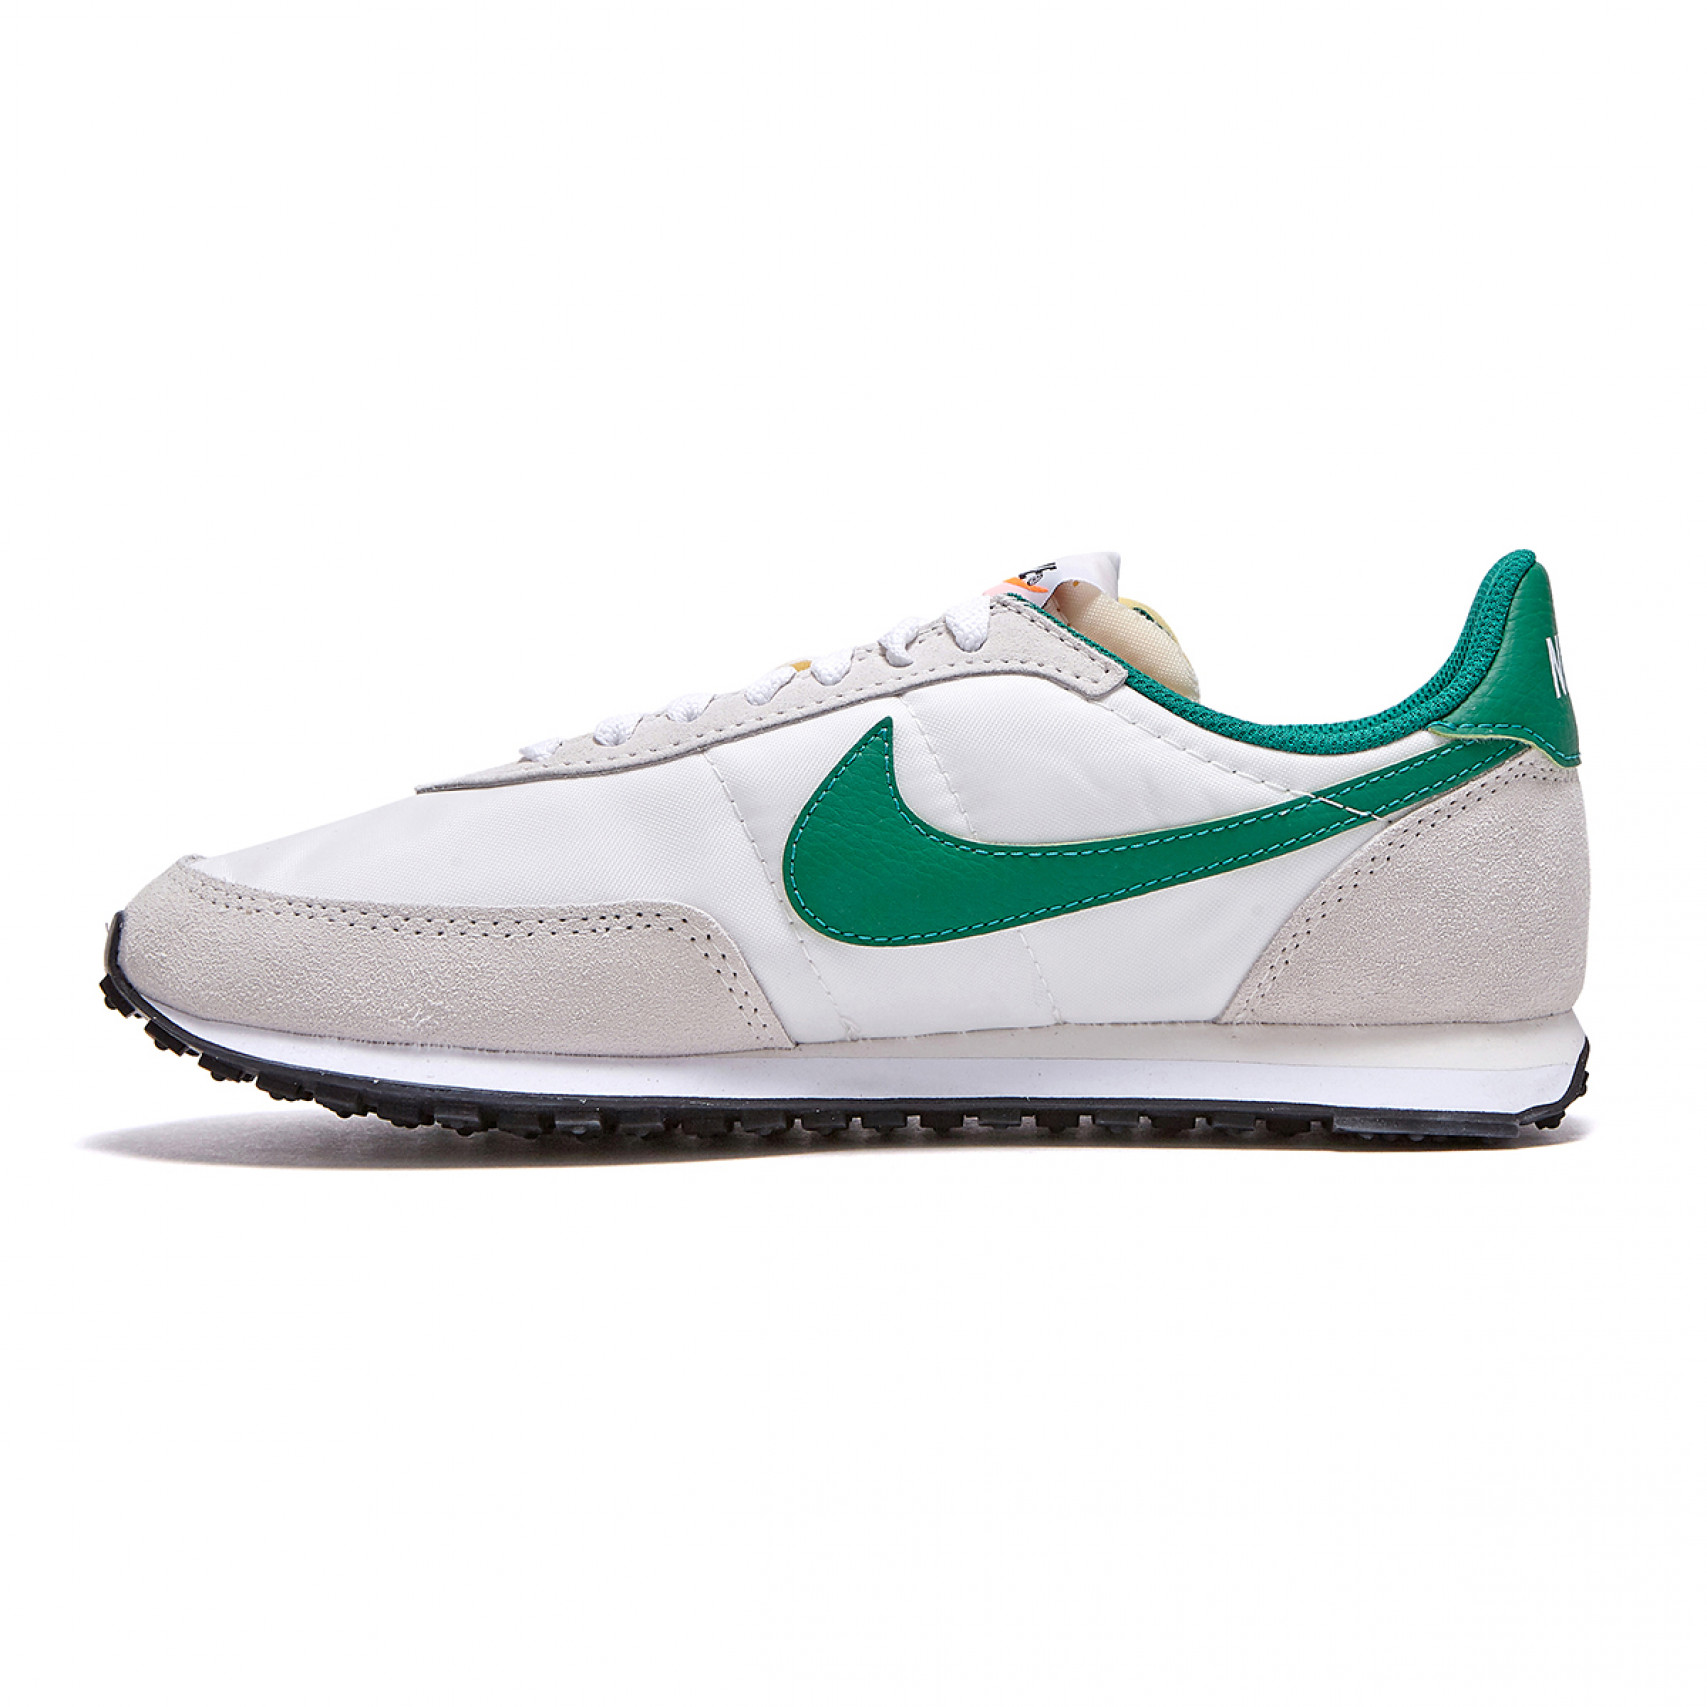 NIKE WAFFLE TRAINER 2 / DH1349-003